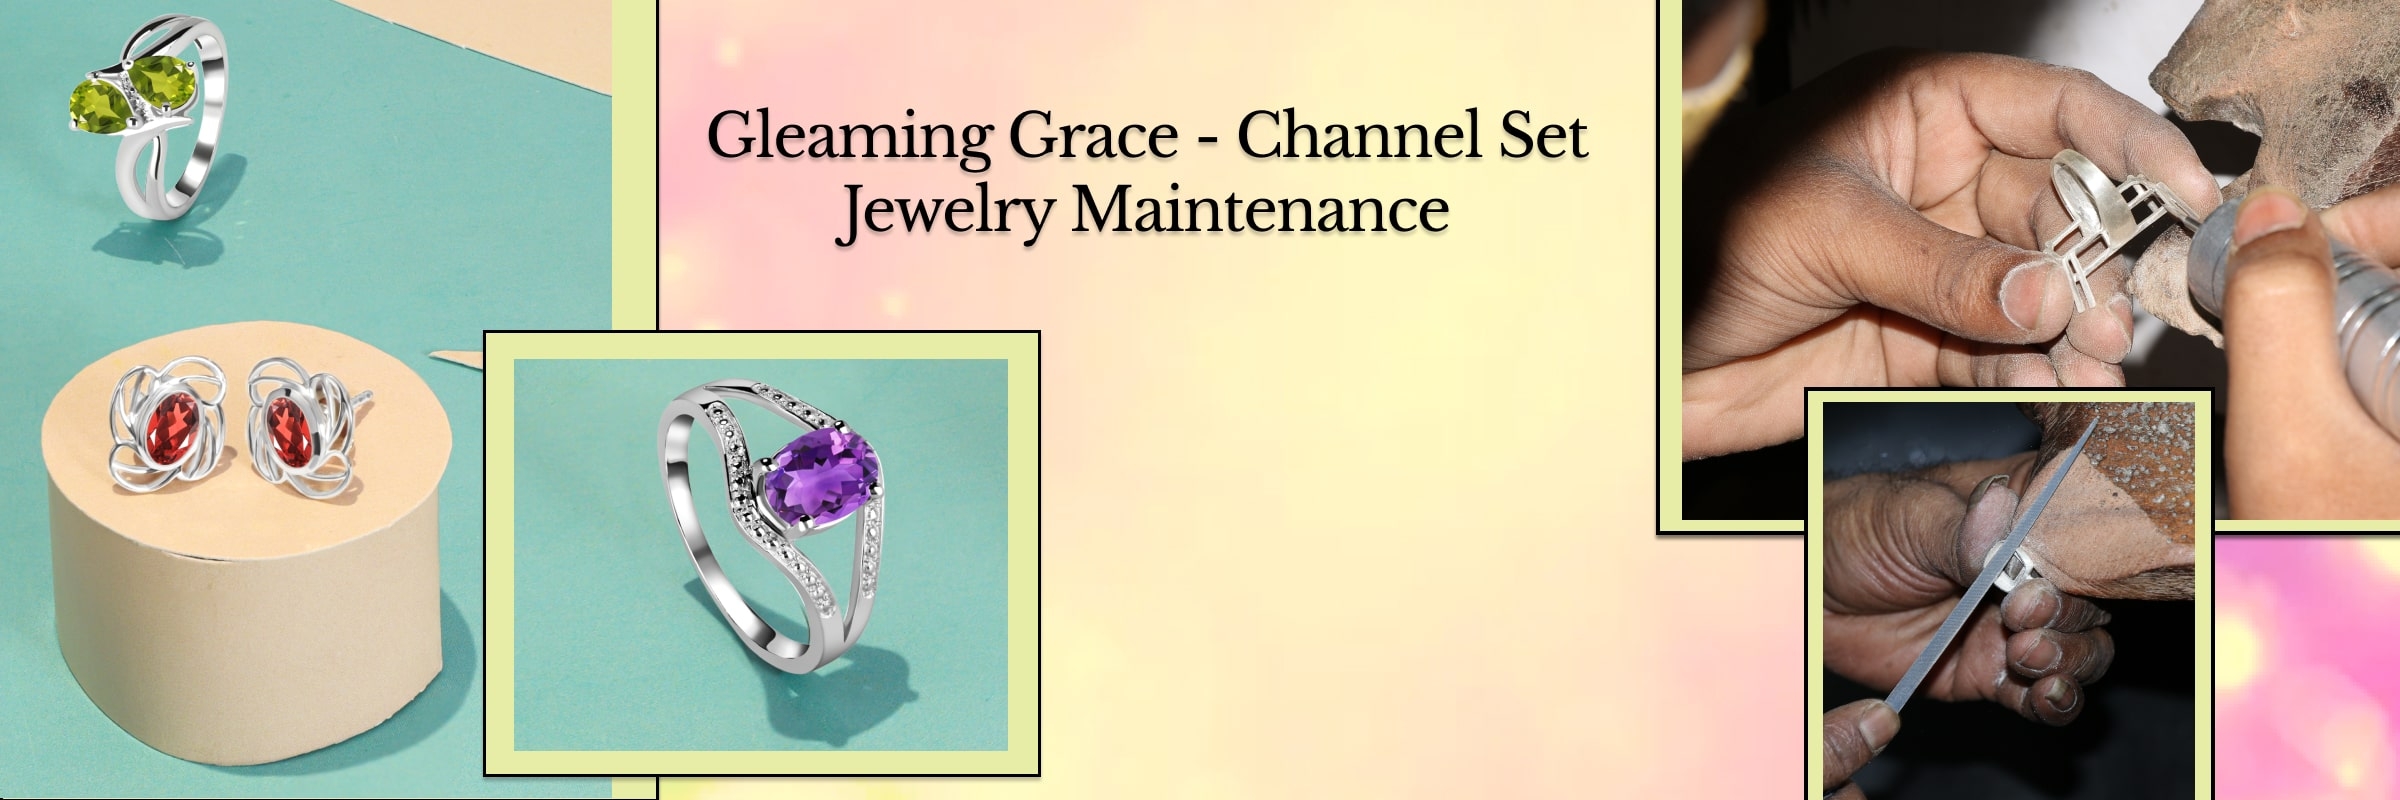 Care and Maintenance of Channel-Set Jewelry